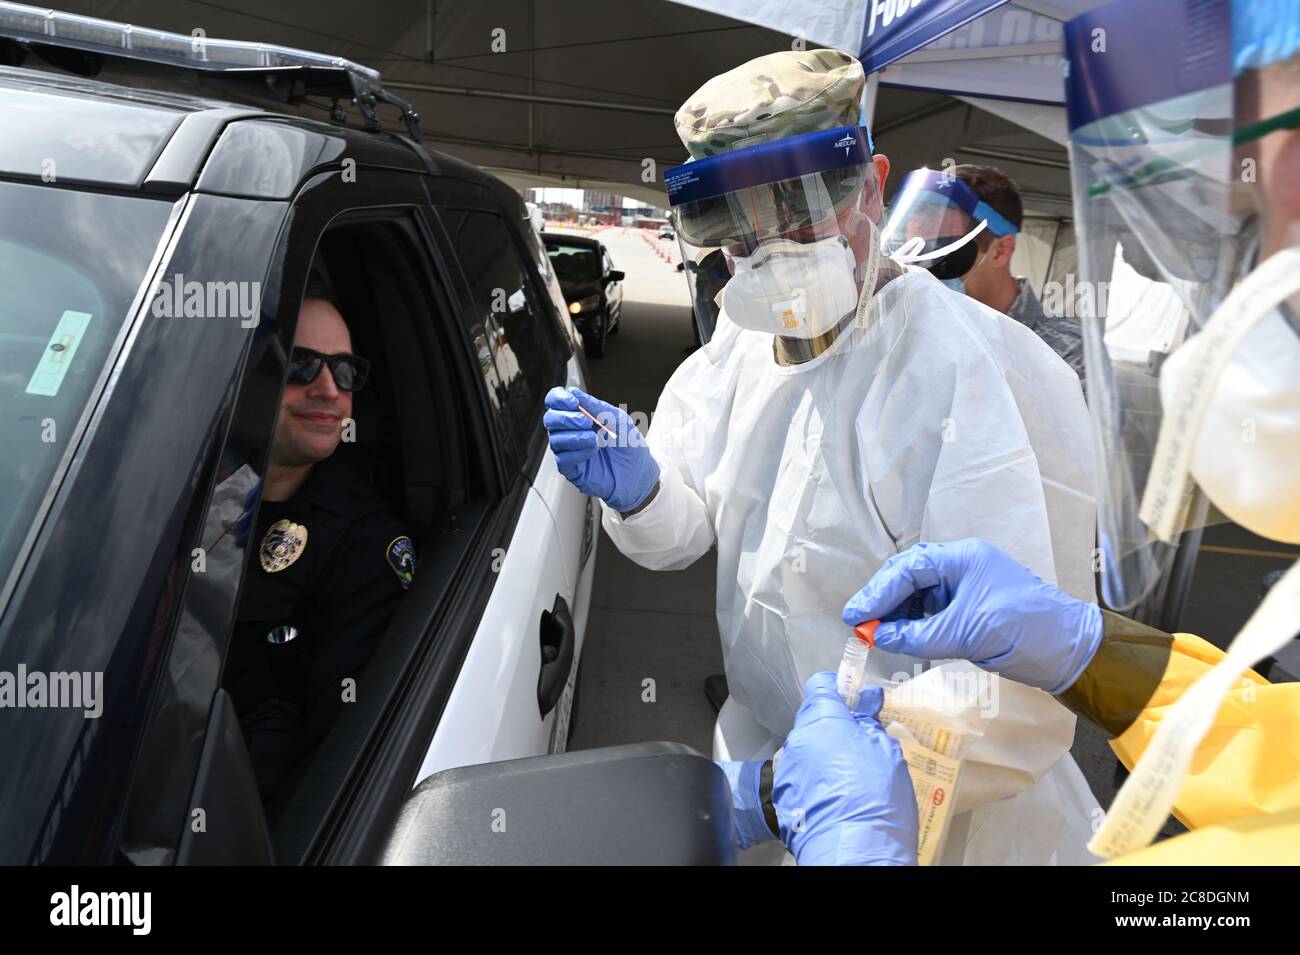 Lt. Col. Dwight Harley, of the 119th Medical Group, takes a swab sample from an asymptomatic Fargo police officer who is volunteering to take a COVID-19 test in the parking lot of the FaroDome, N.D., April 25, 2020. He is wearing personal protective equipment (PPE) to stay safe while he works and help prevent the spread of the Coronavirus while testing people as they drive through the mass testing process in their vehicles. He is just one of the many N.D. National Guard members partnering with the N.D. Department of Health and other civilian agencies in support of the whole community response Stock Photo